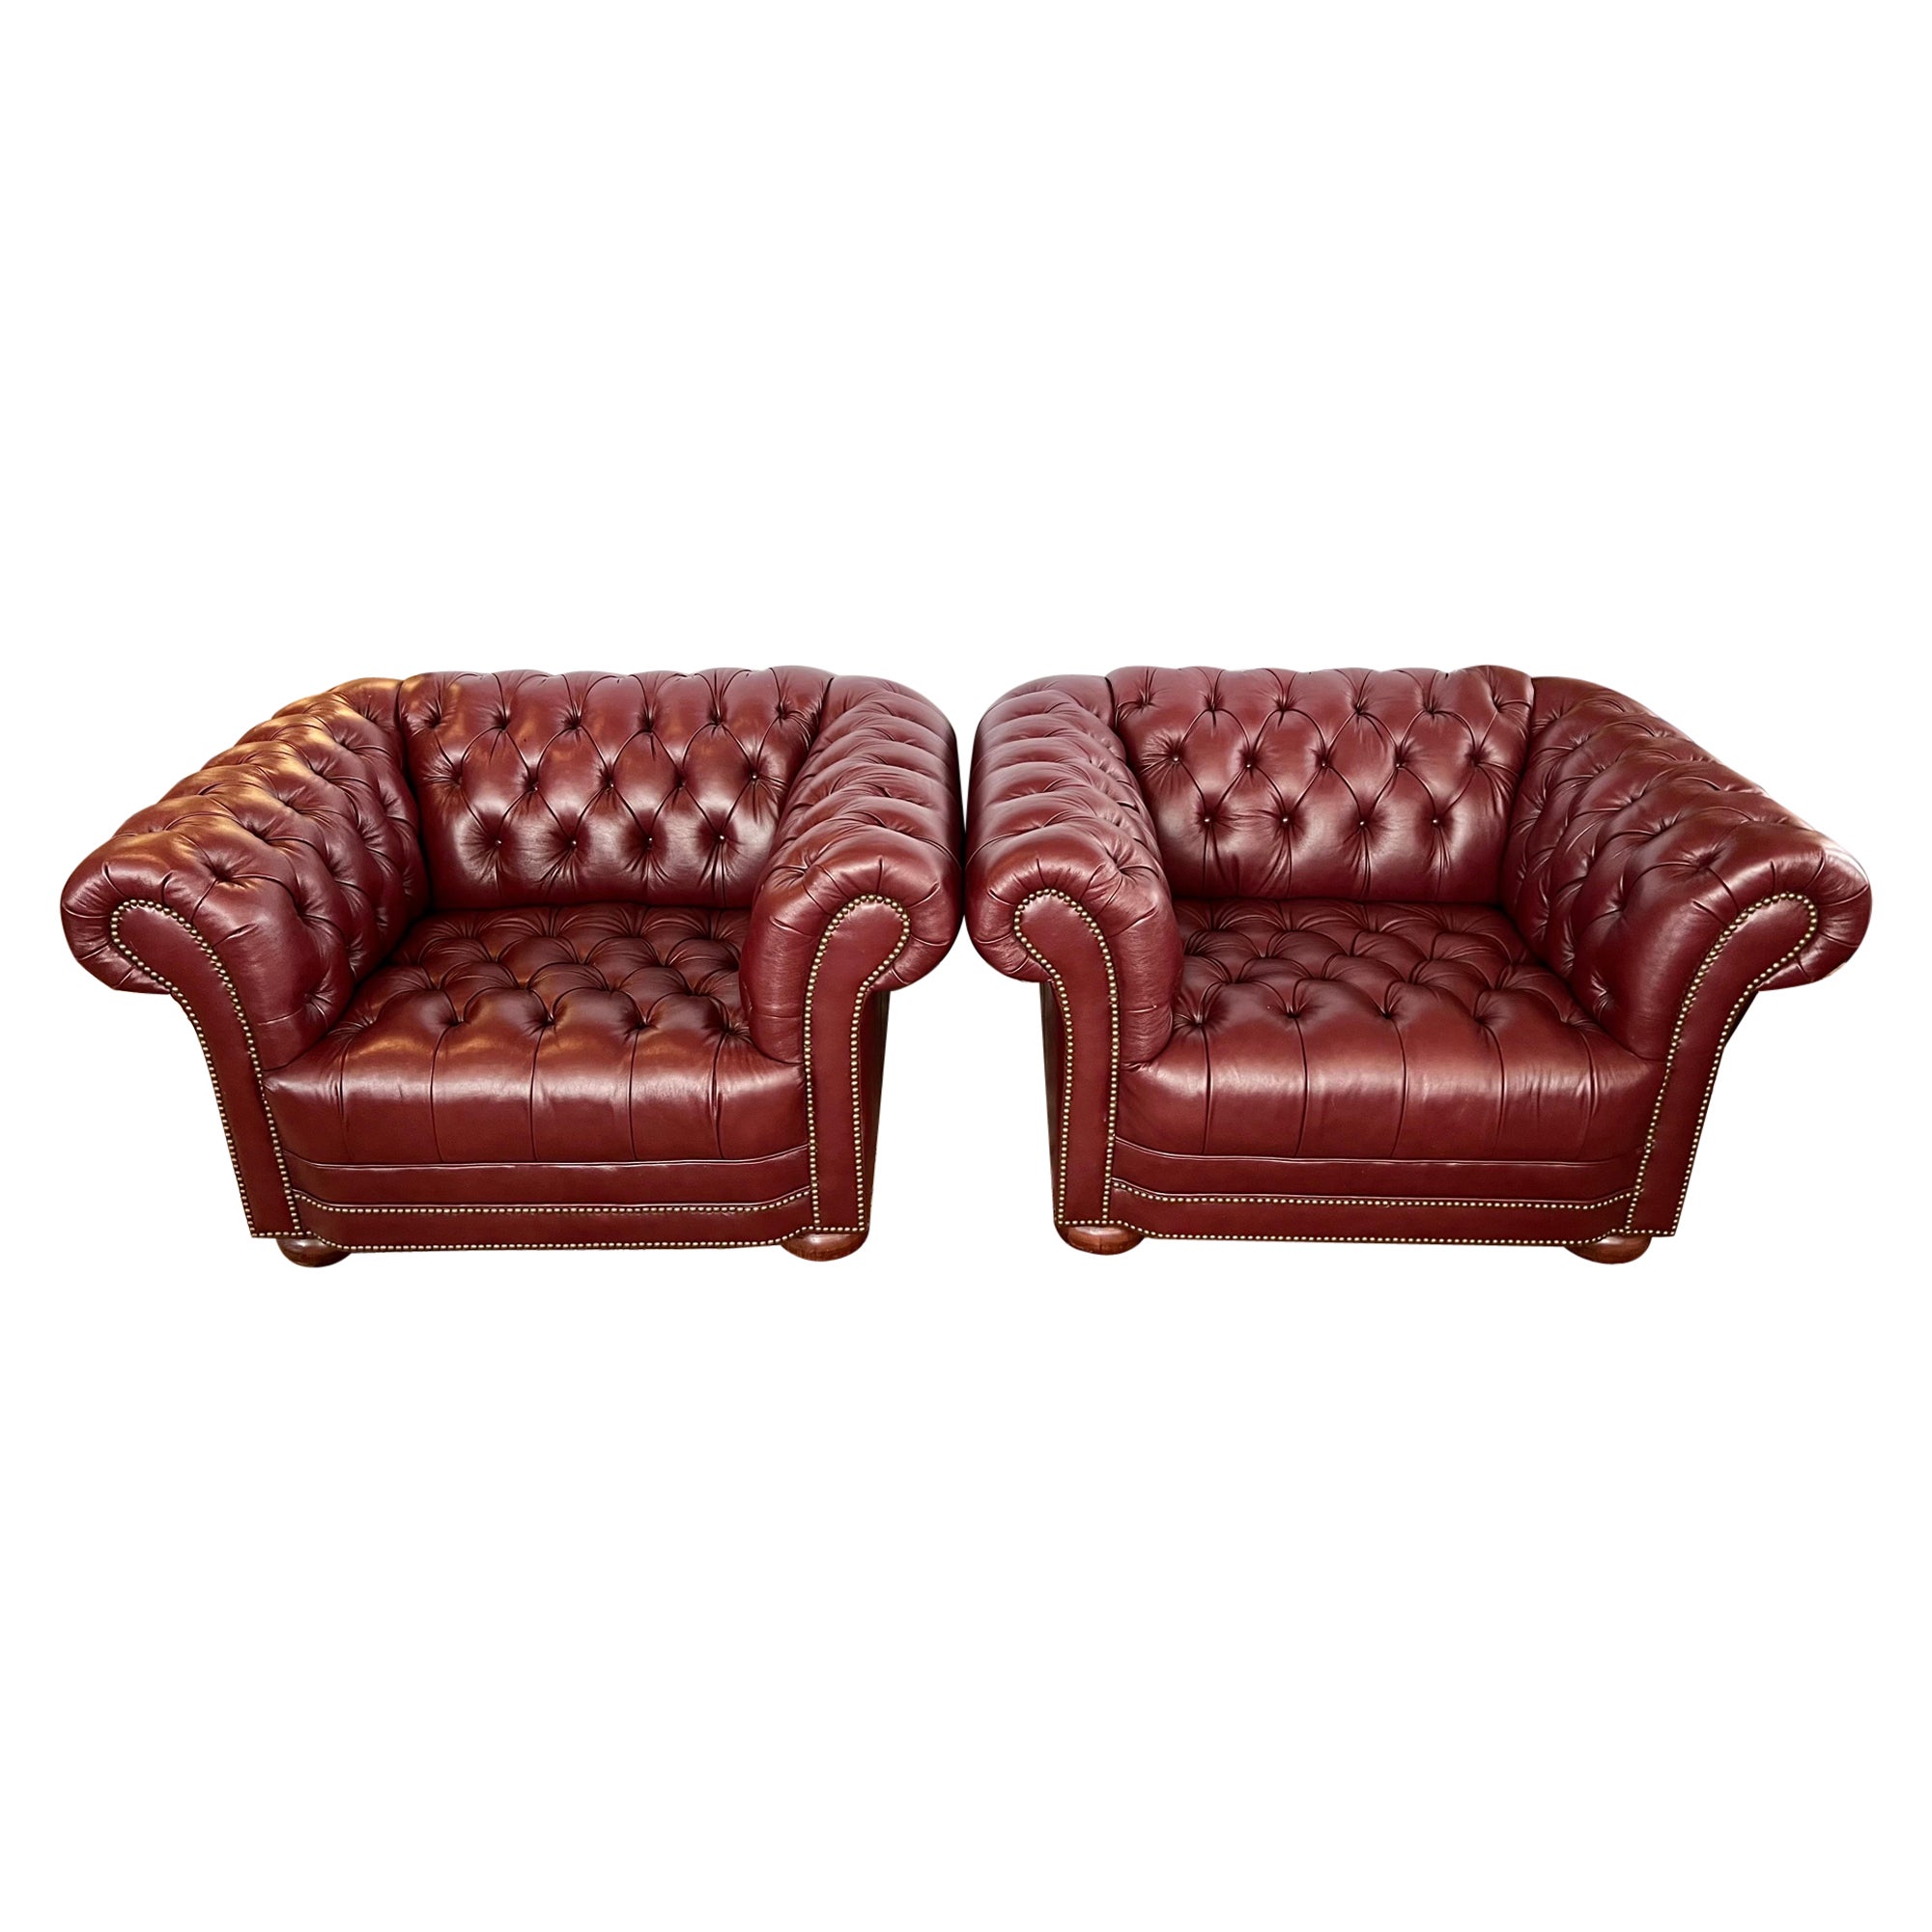 Pair of Large Burgundy Leather Chesterfield Tufted Club Reading Chairs